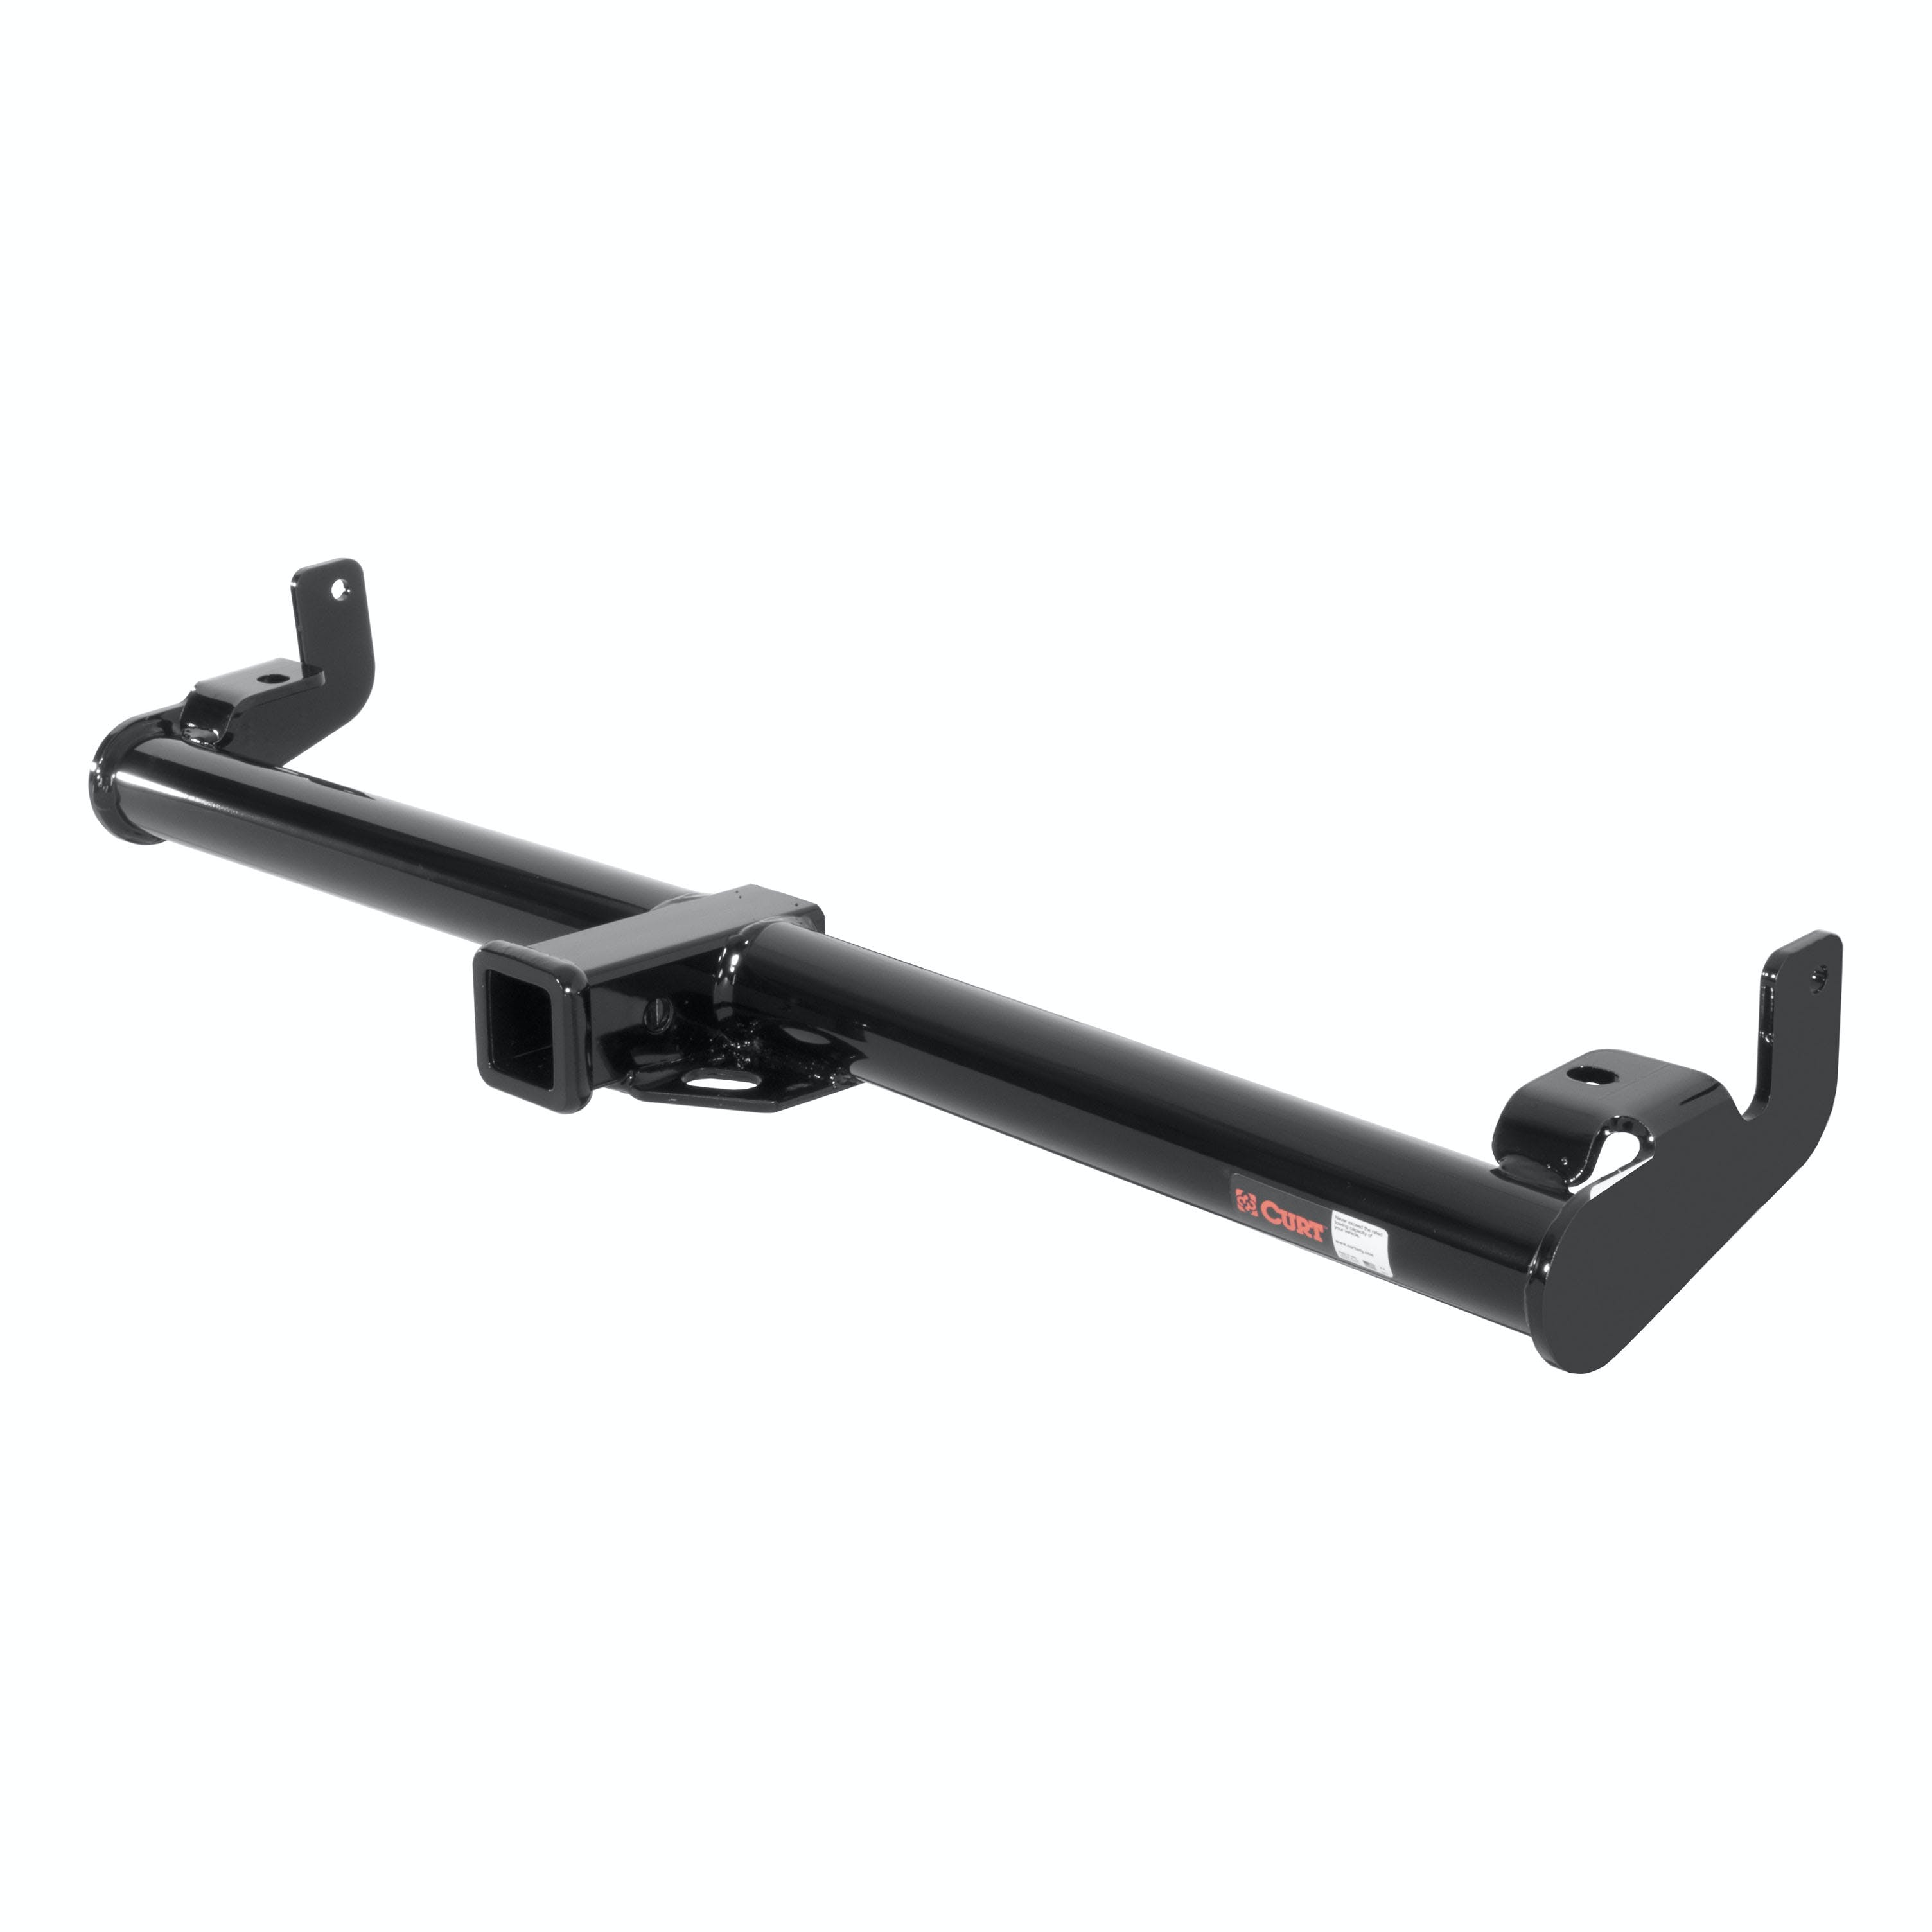 CURT 13430 Class 3 Trailer Hitch, 2 Receiver, Select Jeep Wrangler TJ (Round Tube Frame)